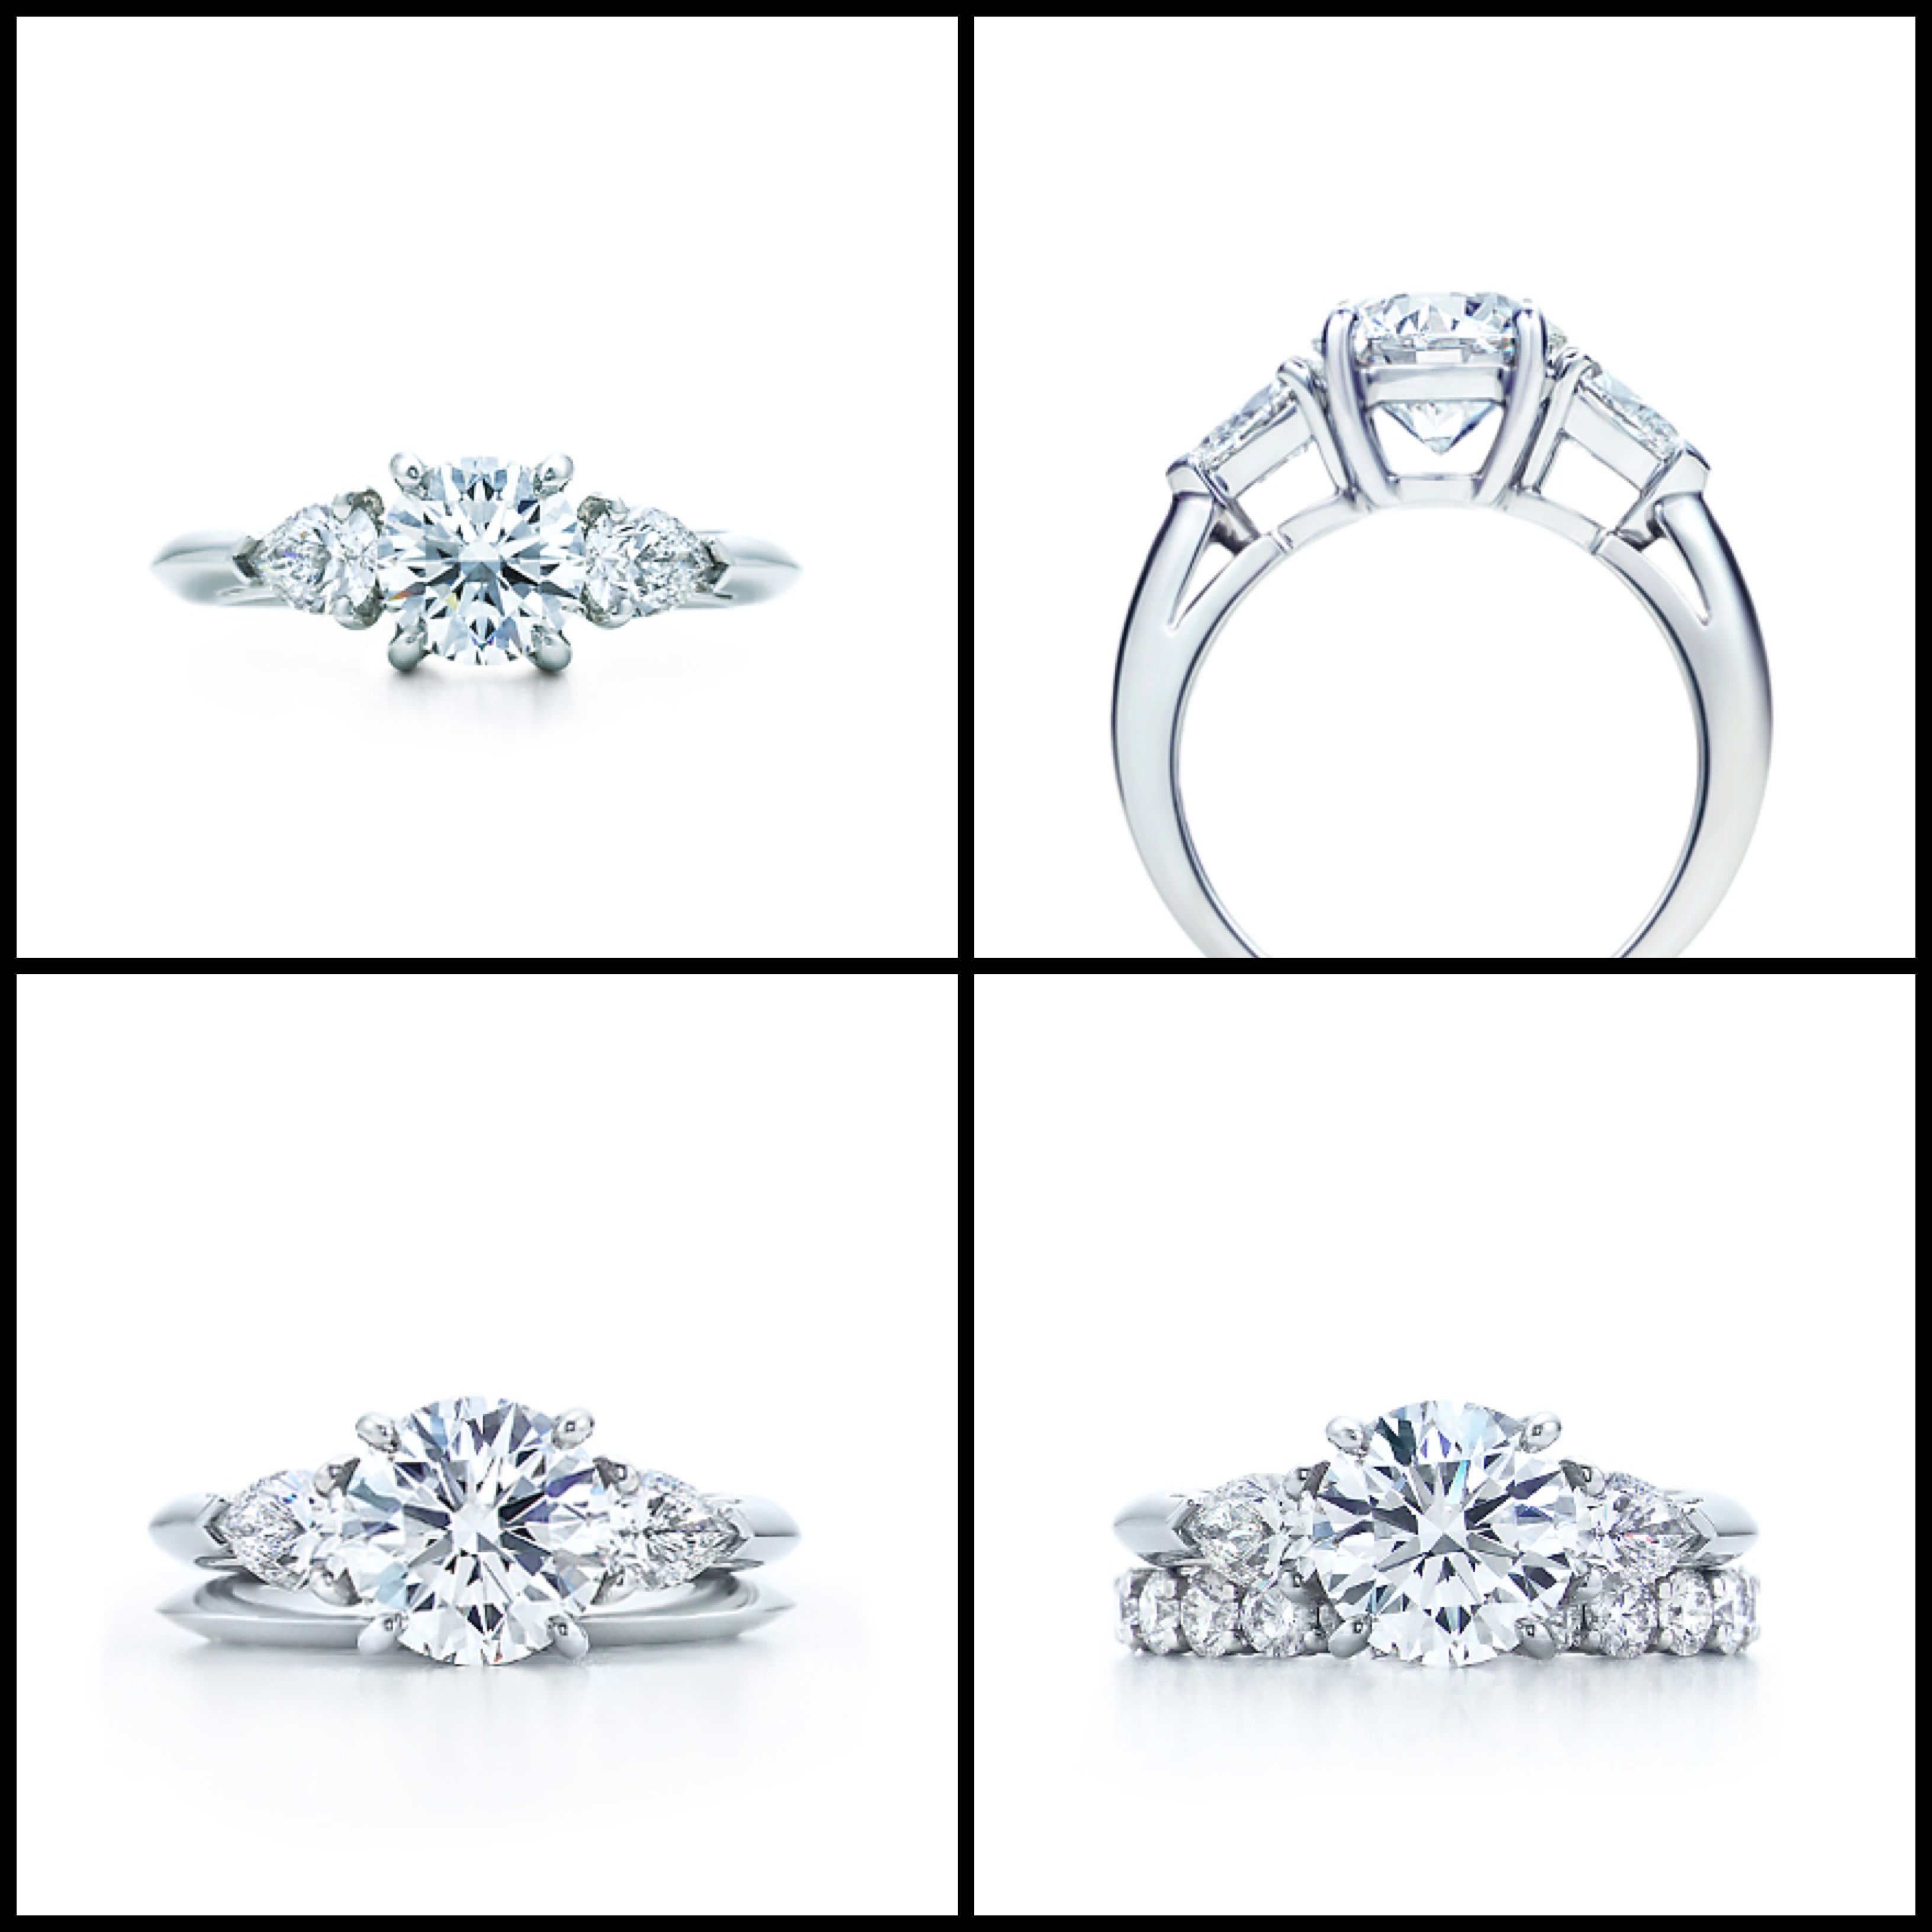 Tiffany Round Brilliant With Pear Shaped Side Stones Throughout Round Brilliant Engagement Rings With Pear Shaped Side Stones (View 13 of 25)